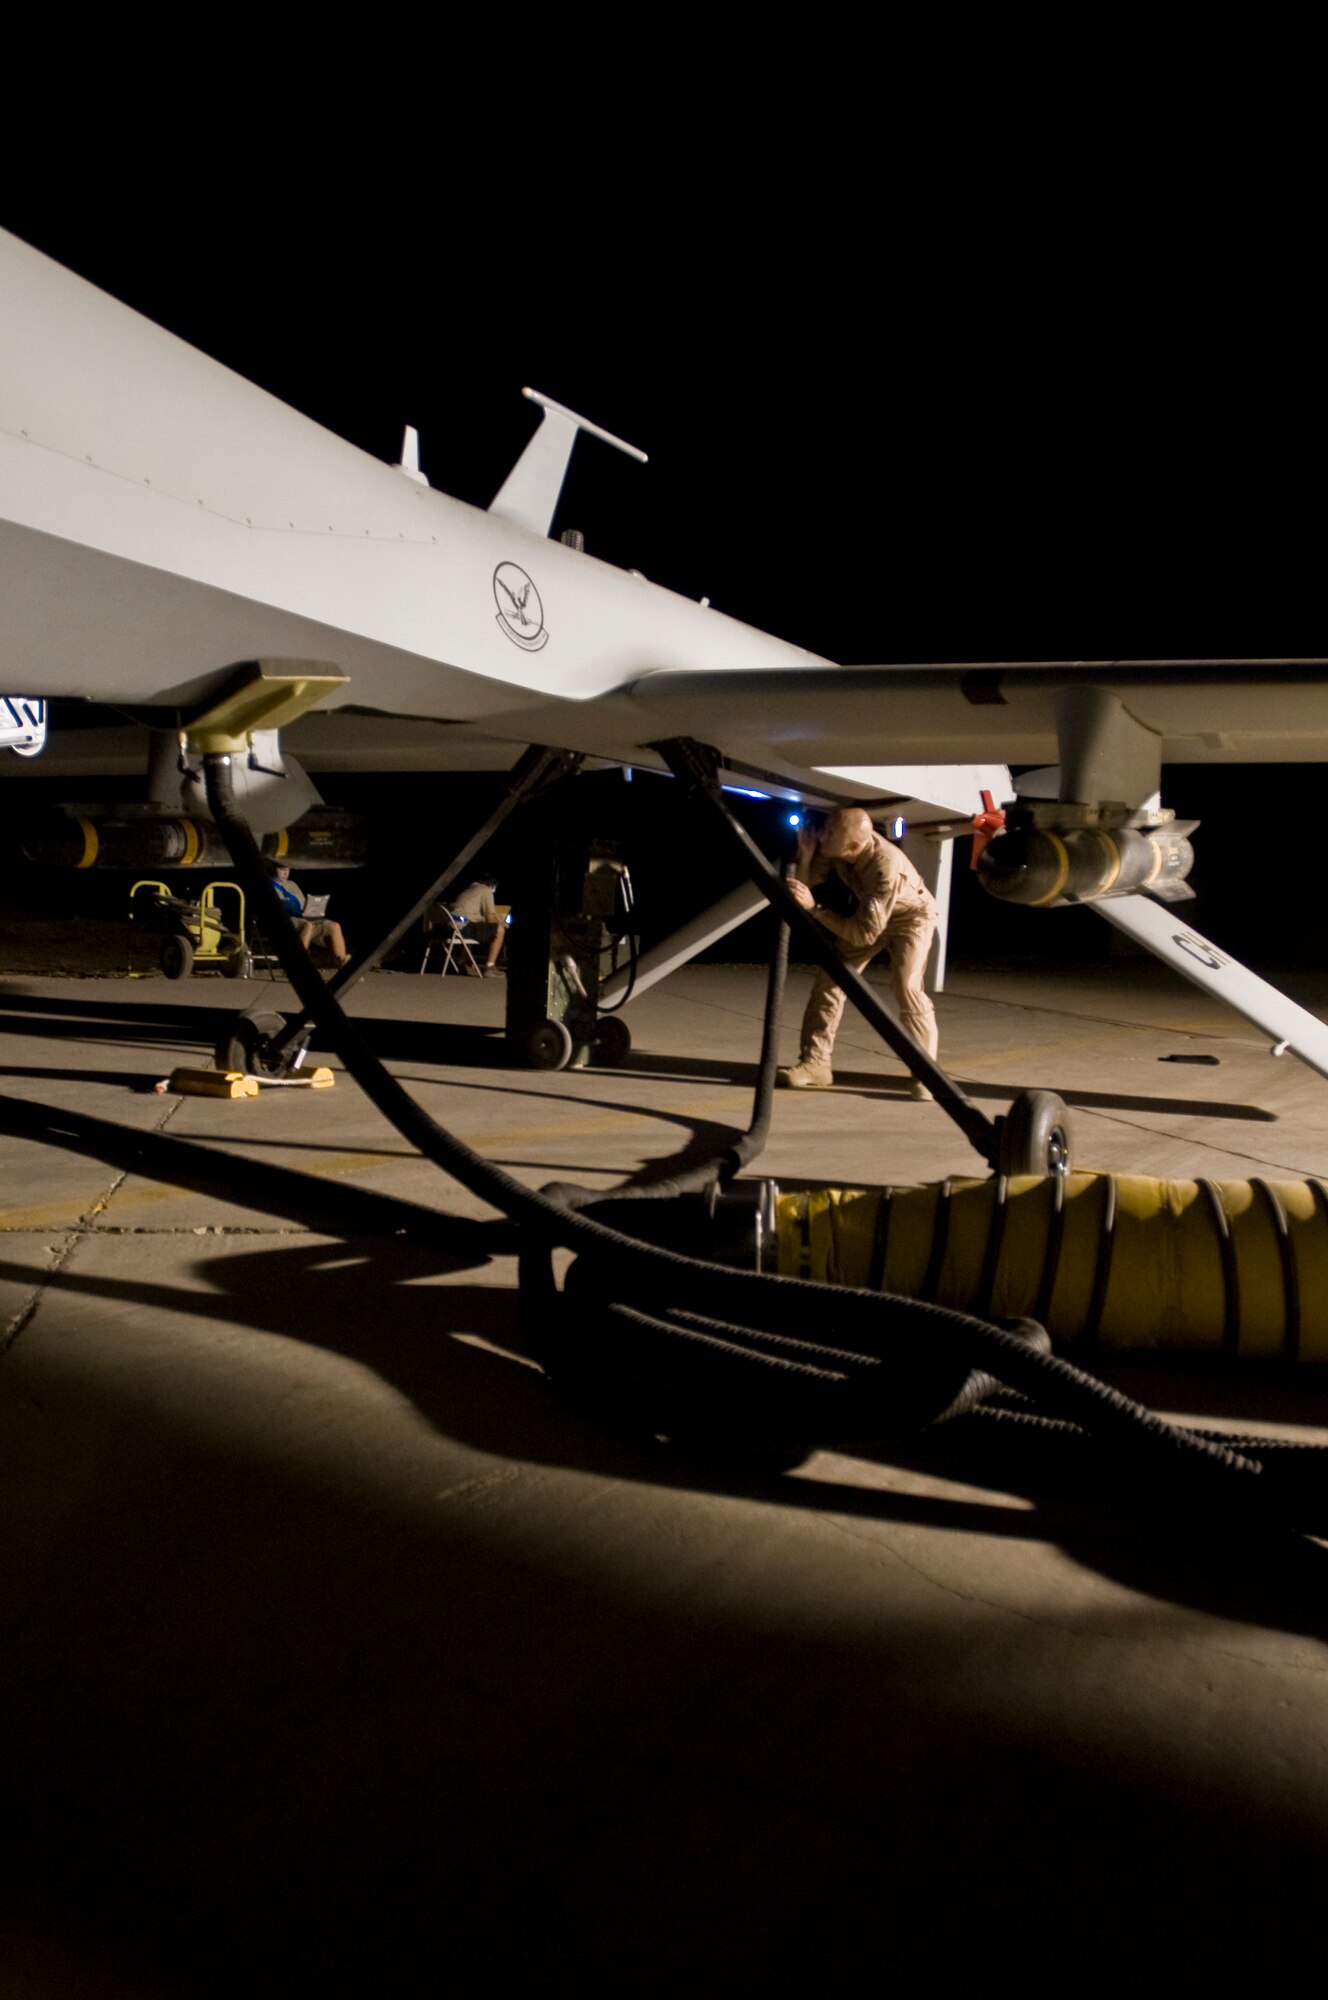 ALI BASE, Iraq - Lt. Col. Geoffrey Barnes, Detachment 1 46th Expeditionary Reconnaissance Attack Squadron commander, performs a pre-flight inspection of an MQ-1B Predator unmanned aerial system Sept. 3, 2008. The Predator is a medium-altitude, long-endurance, remotely piloted aircraft. Its mission here is to interdict and conduct armed reconnaissance against critical and perishable targets in support of the Global War on Terrorism. Barnes is deployed from Creech Air Force Base, Nev. (U.S. Air Force photo/Airman 1st Class Christopher Griffin)